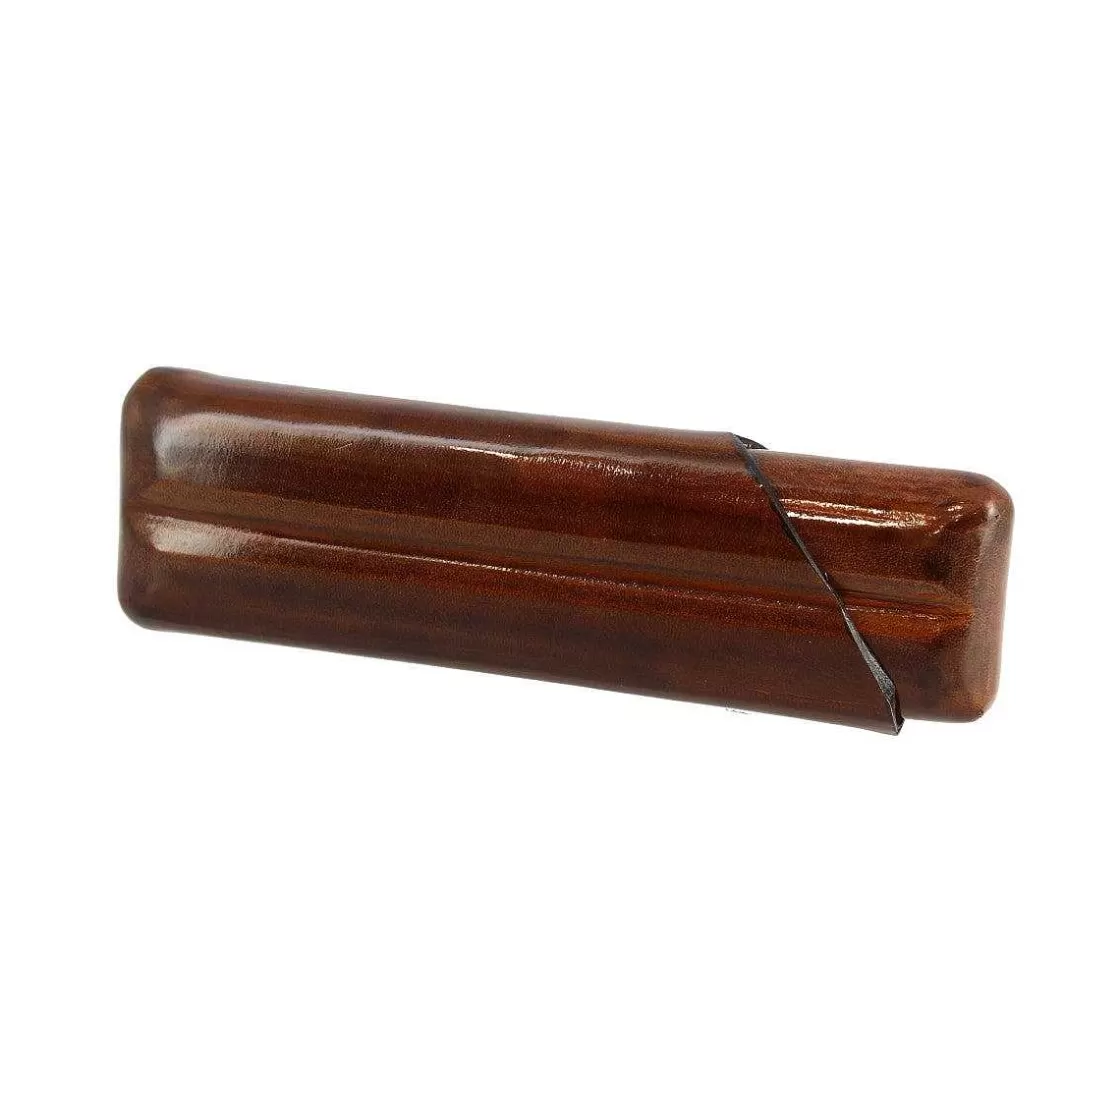 Leonardo Pocket Cuban Cigar Holder Made Of Leather Available In Various Colors Flash Sale